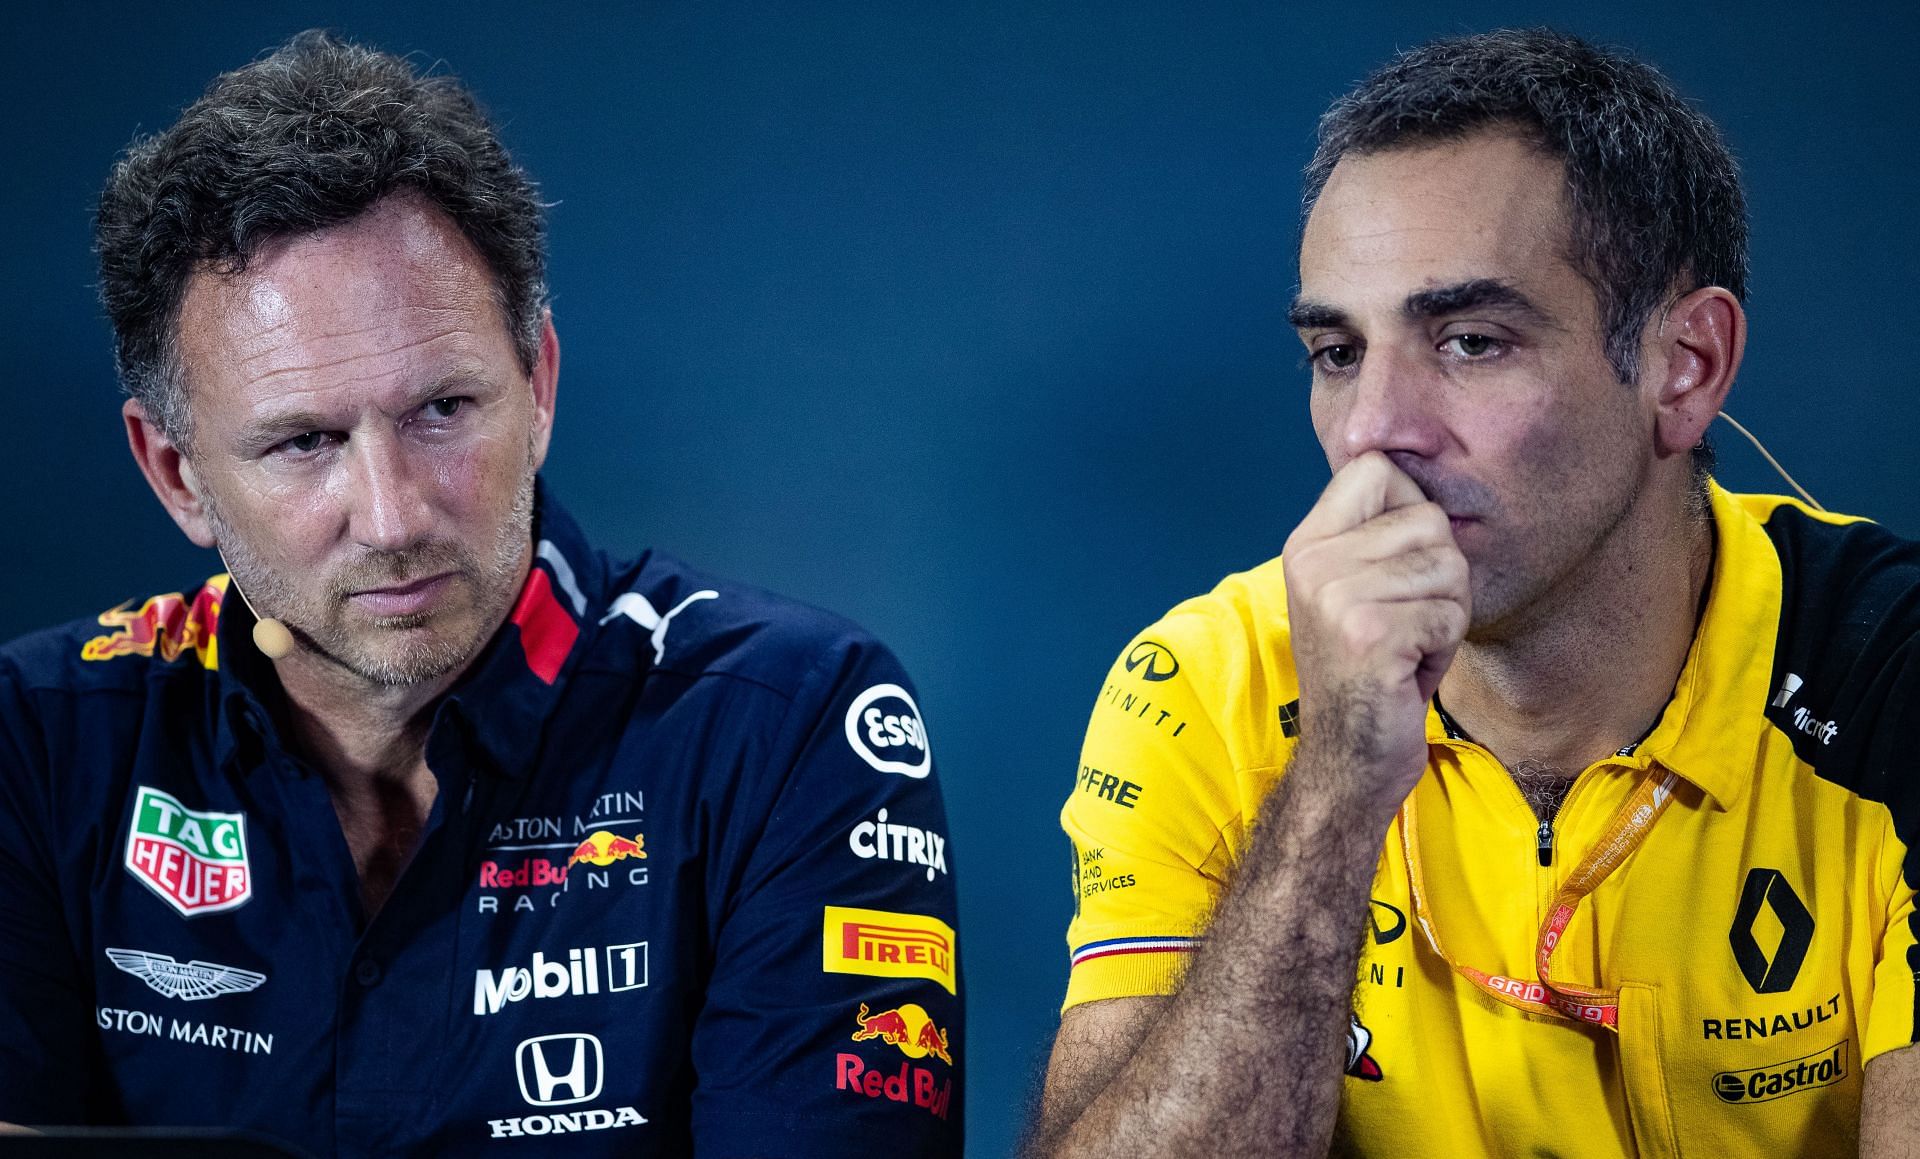 Christian Horner (left) and Cyril Abiteboul (right) last worked together when Renault provided its powertrains to Red Bull